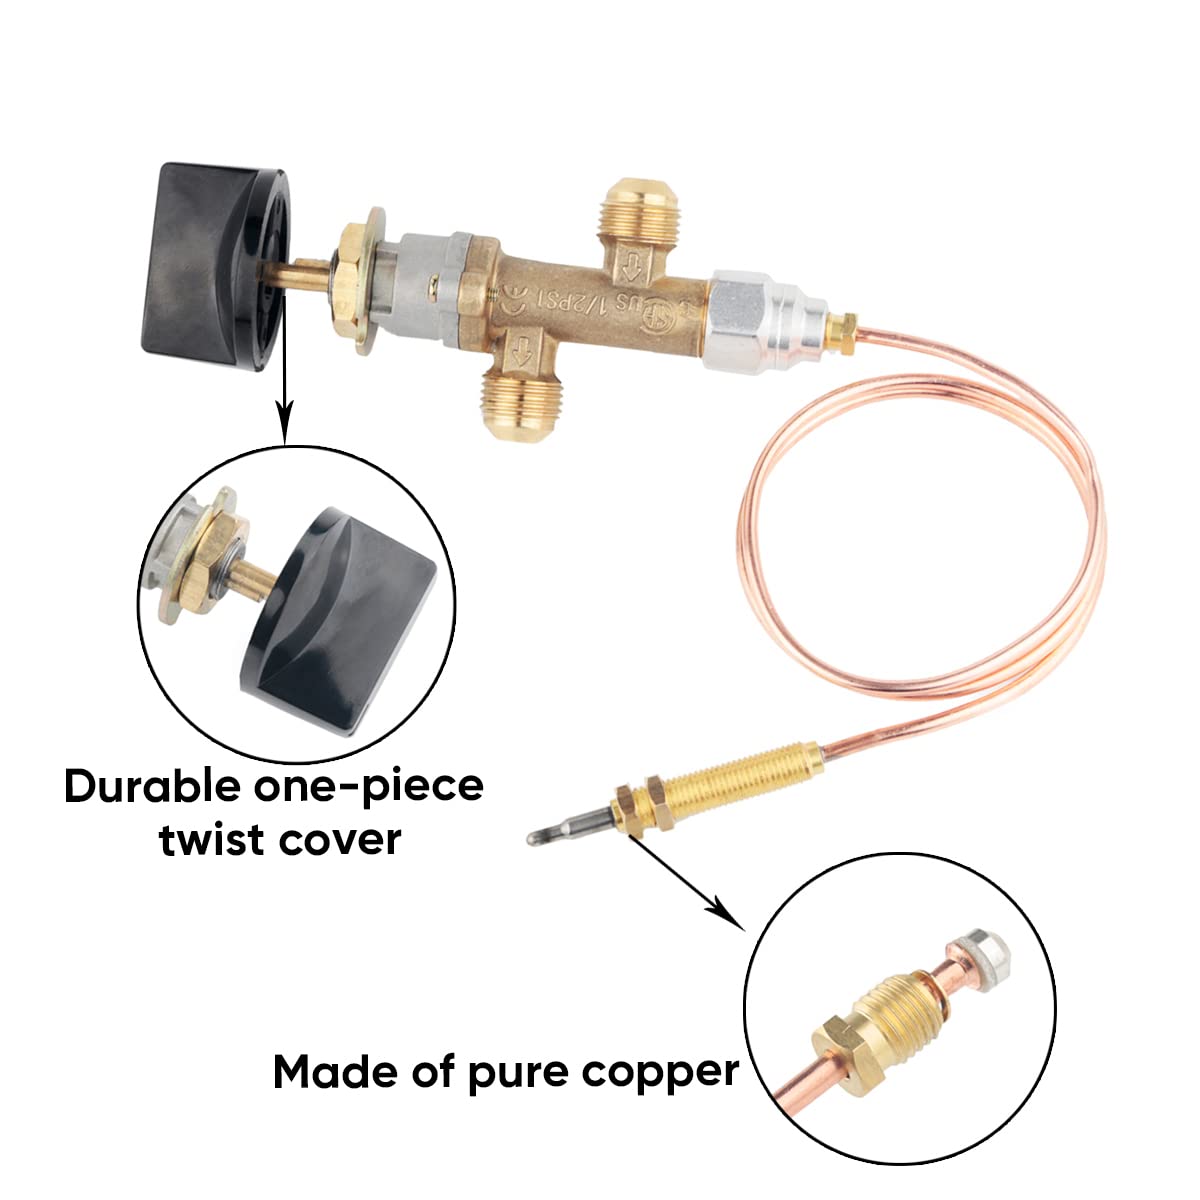 T6 Low Pressure LPG Propane Gas Fireplace Fire Pit Flame Failure Safety Control Valve Kit with Thermocouple & Knob Switch 3/8" Flare Inlet & Outlet Replacement Part for Gas Grill Heater Fire Pit